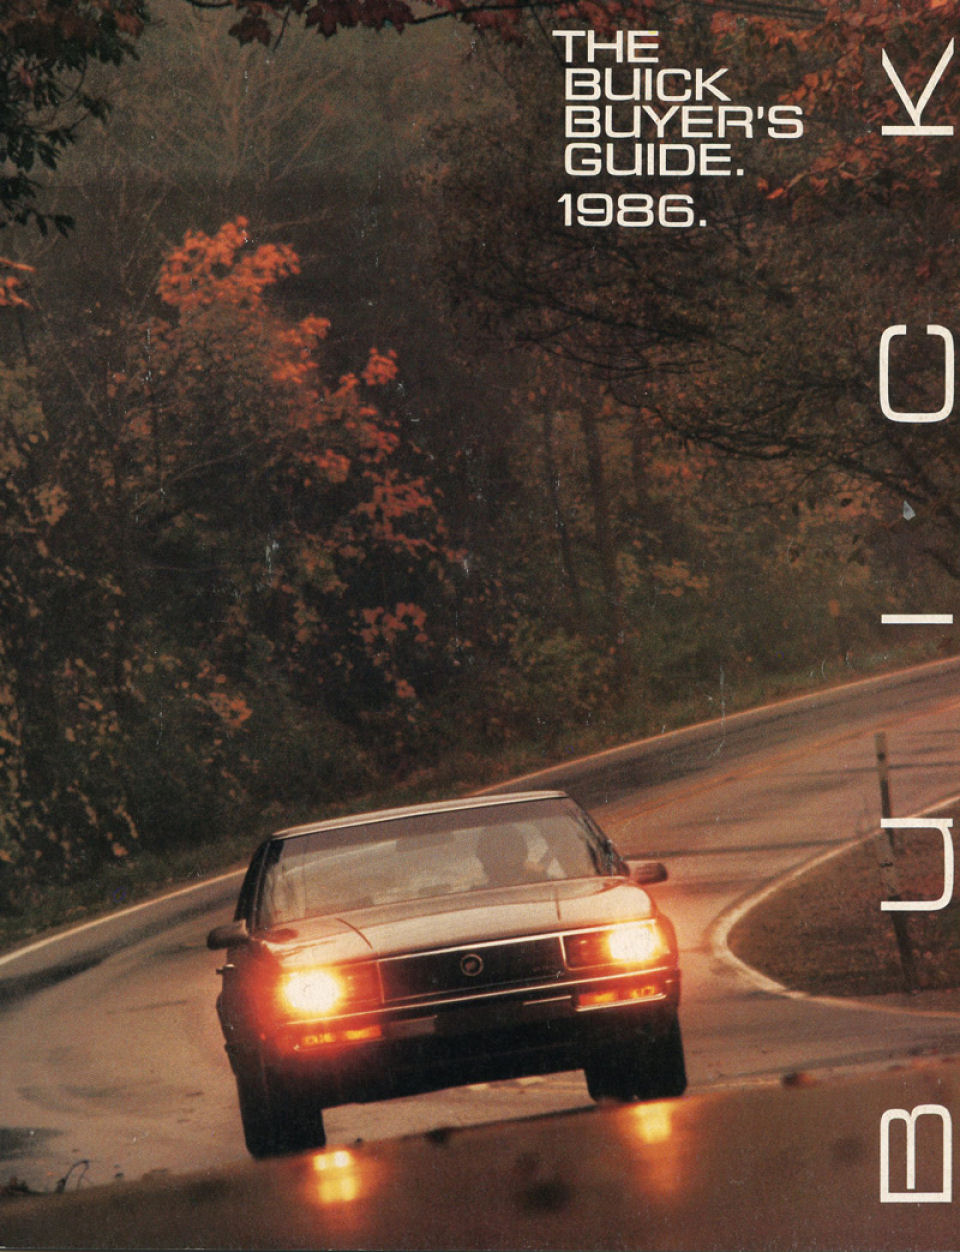 1986 Buick Buyers Guide-01